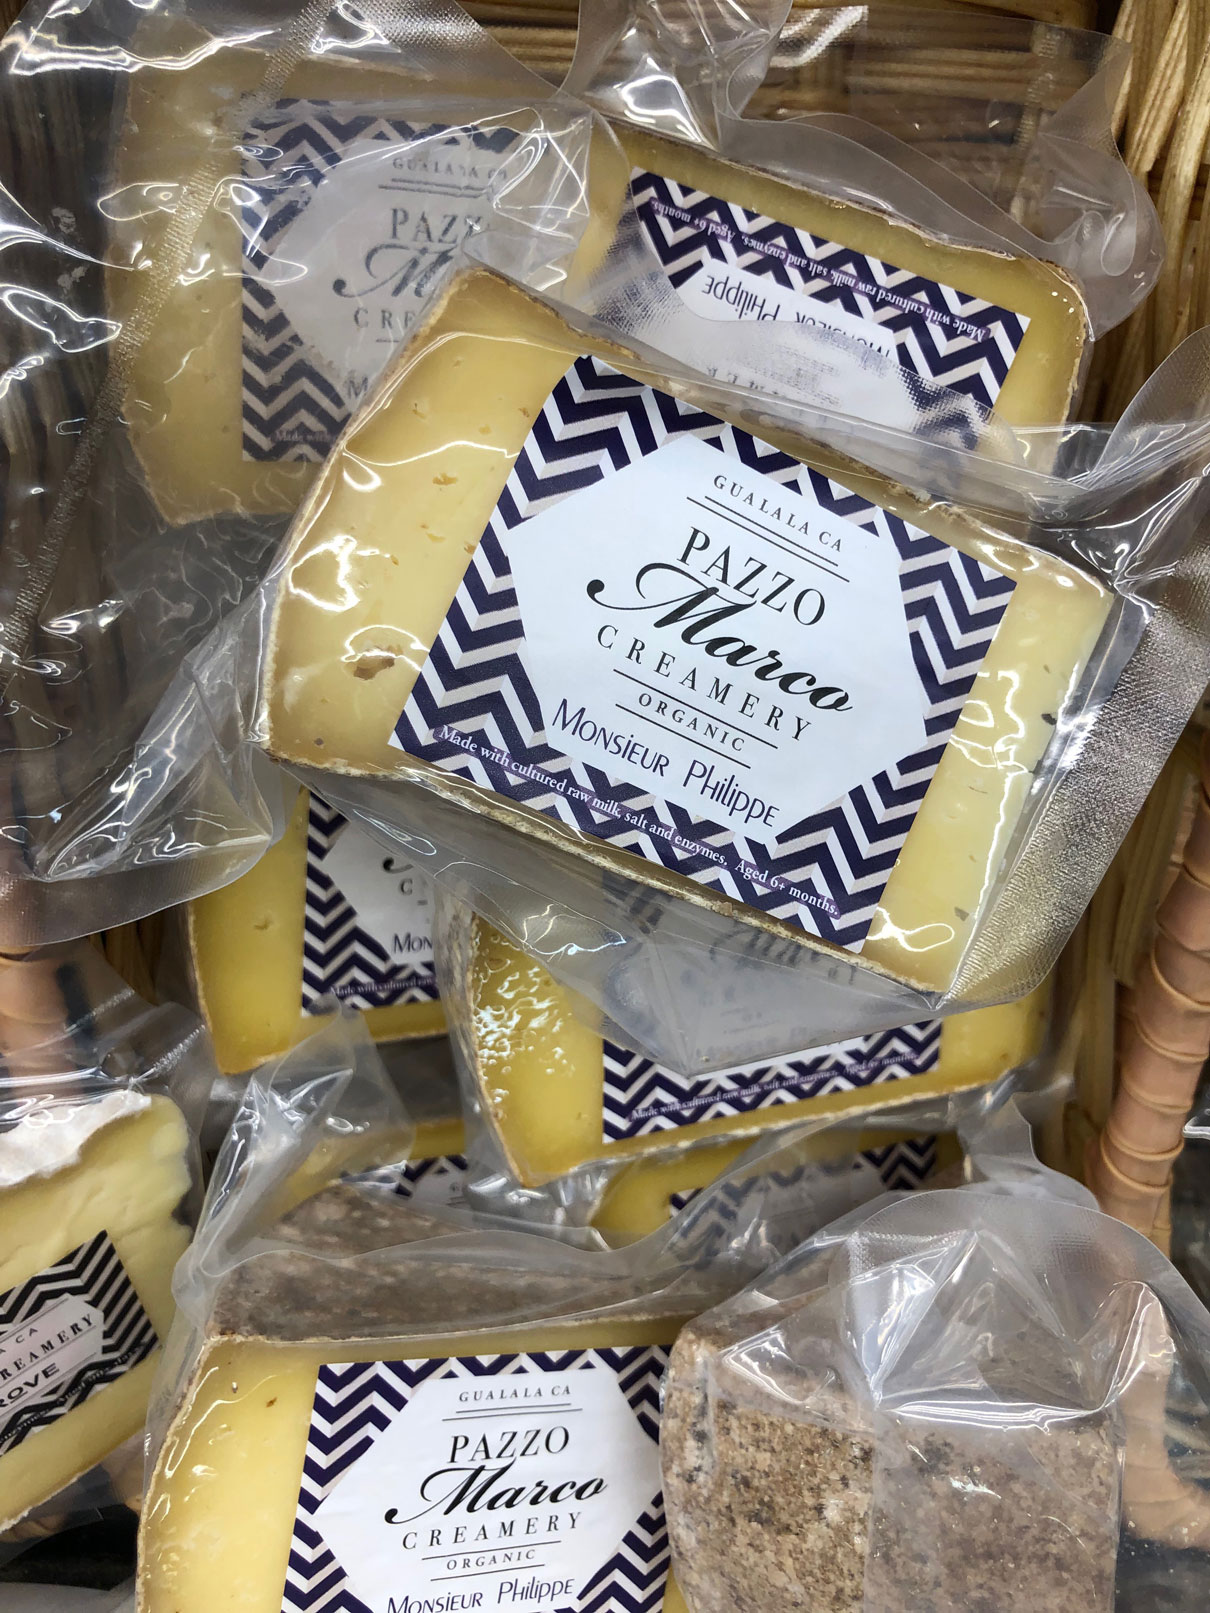 packages of Pazzo Marco cheese